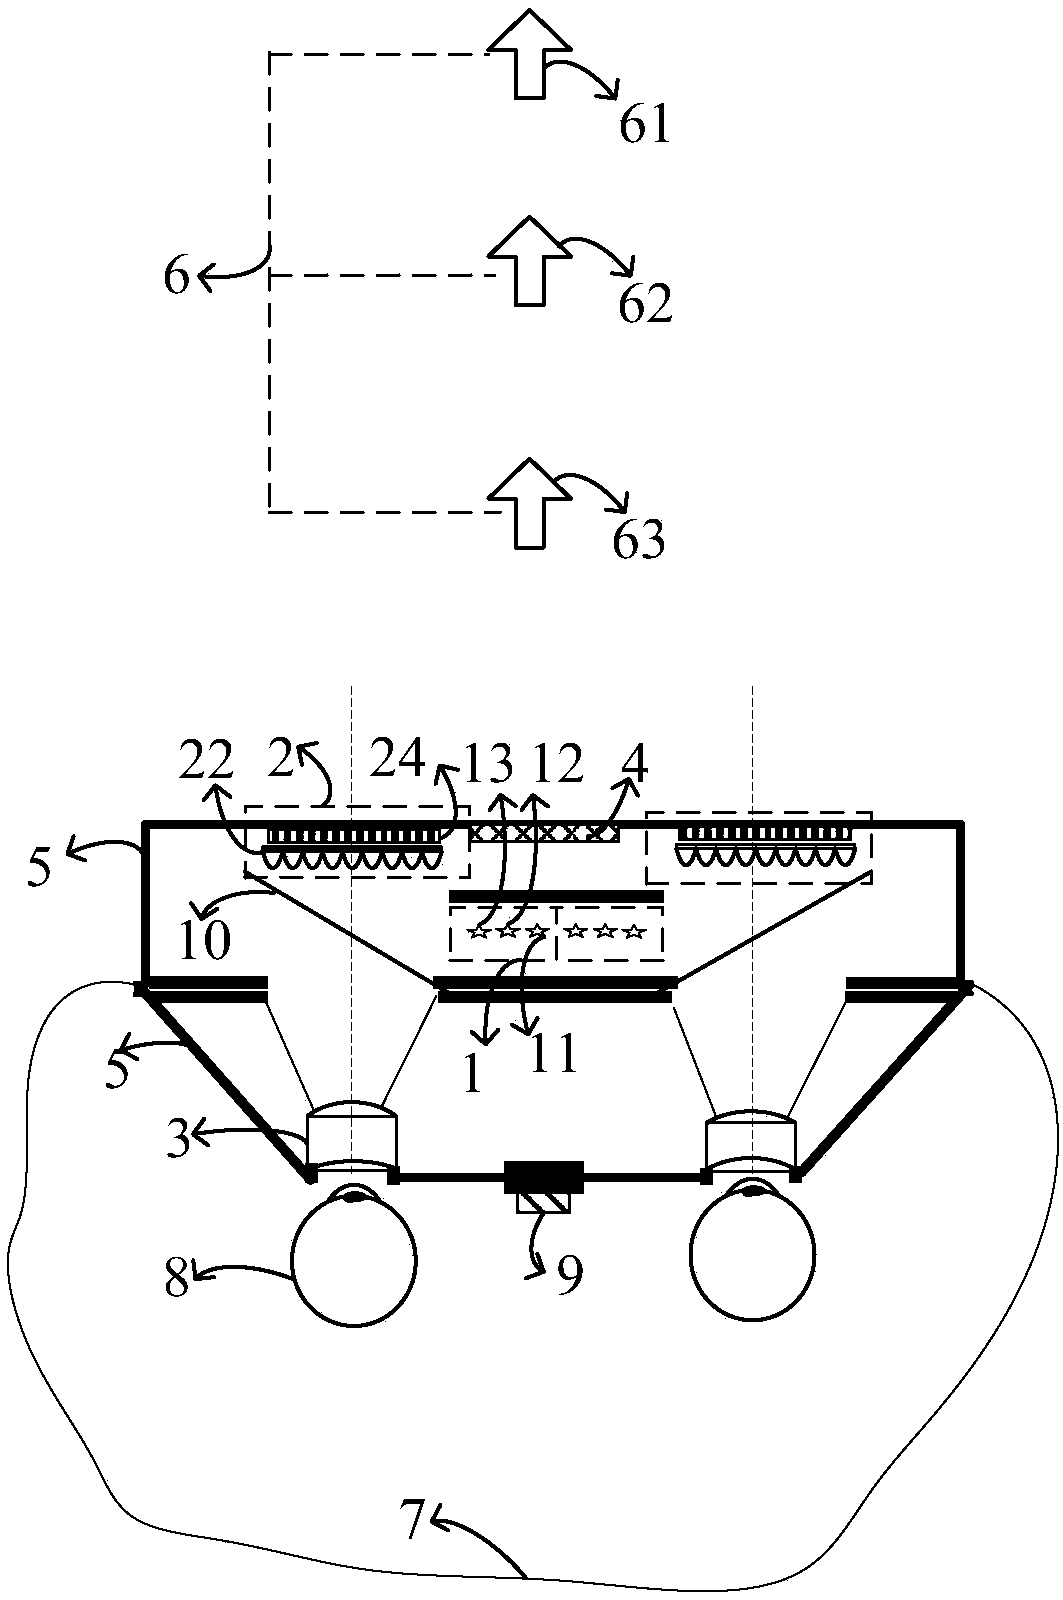 Light-field-imaging-based depth-of-field enhanced type virtual reality display system and method